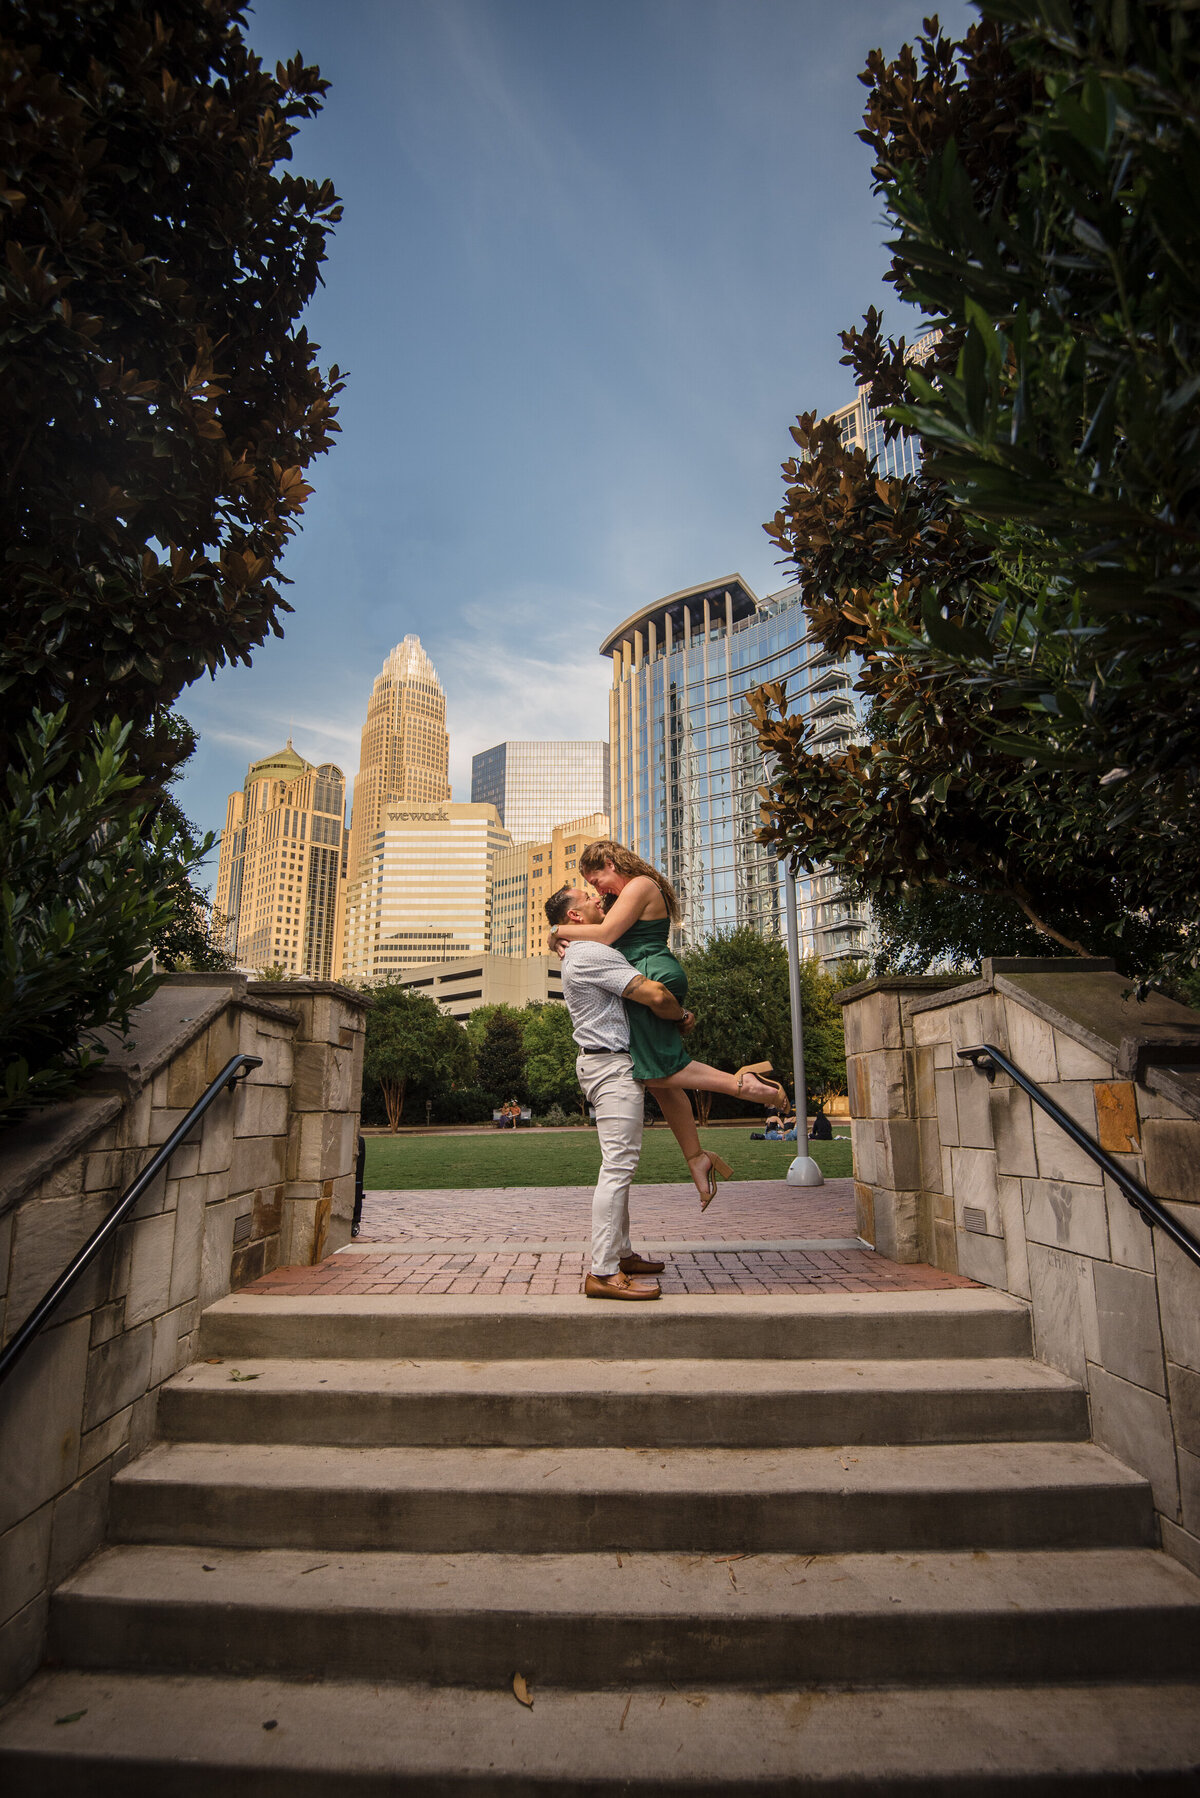 Man-lifting-his-fiancée-up-at-the-top-of-the-stairs-in-Romare-Bearden-Park-with-city-building-in-the-background